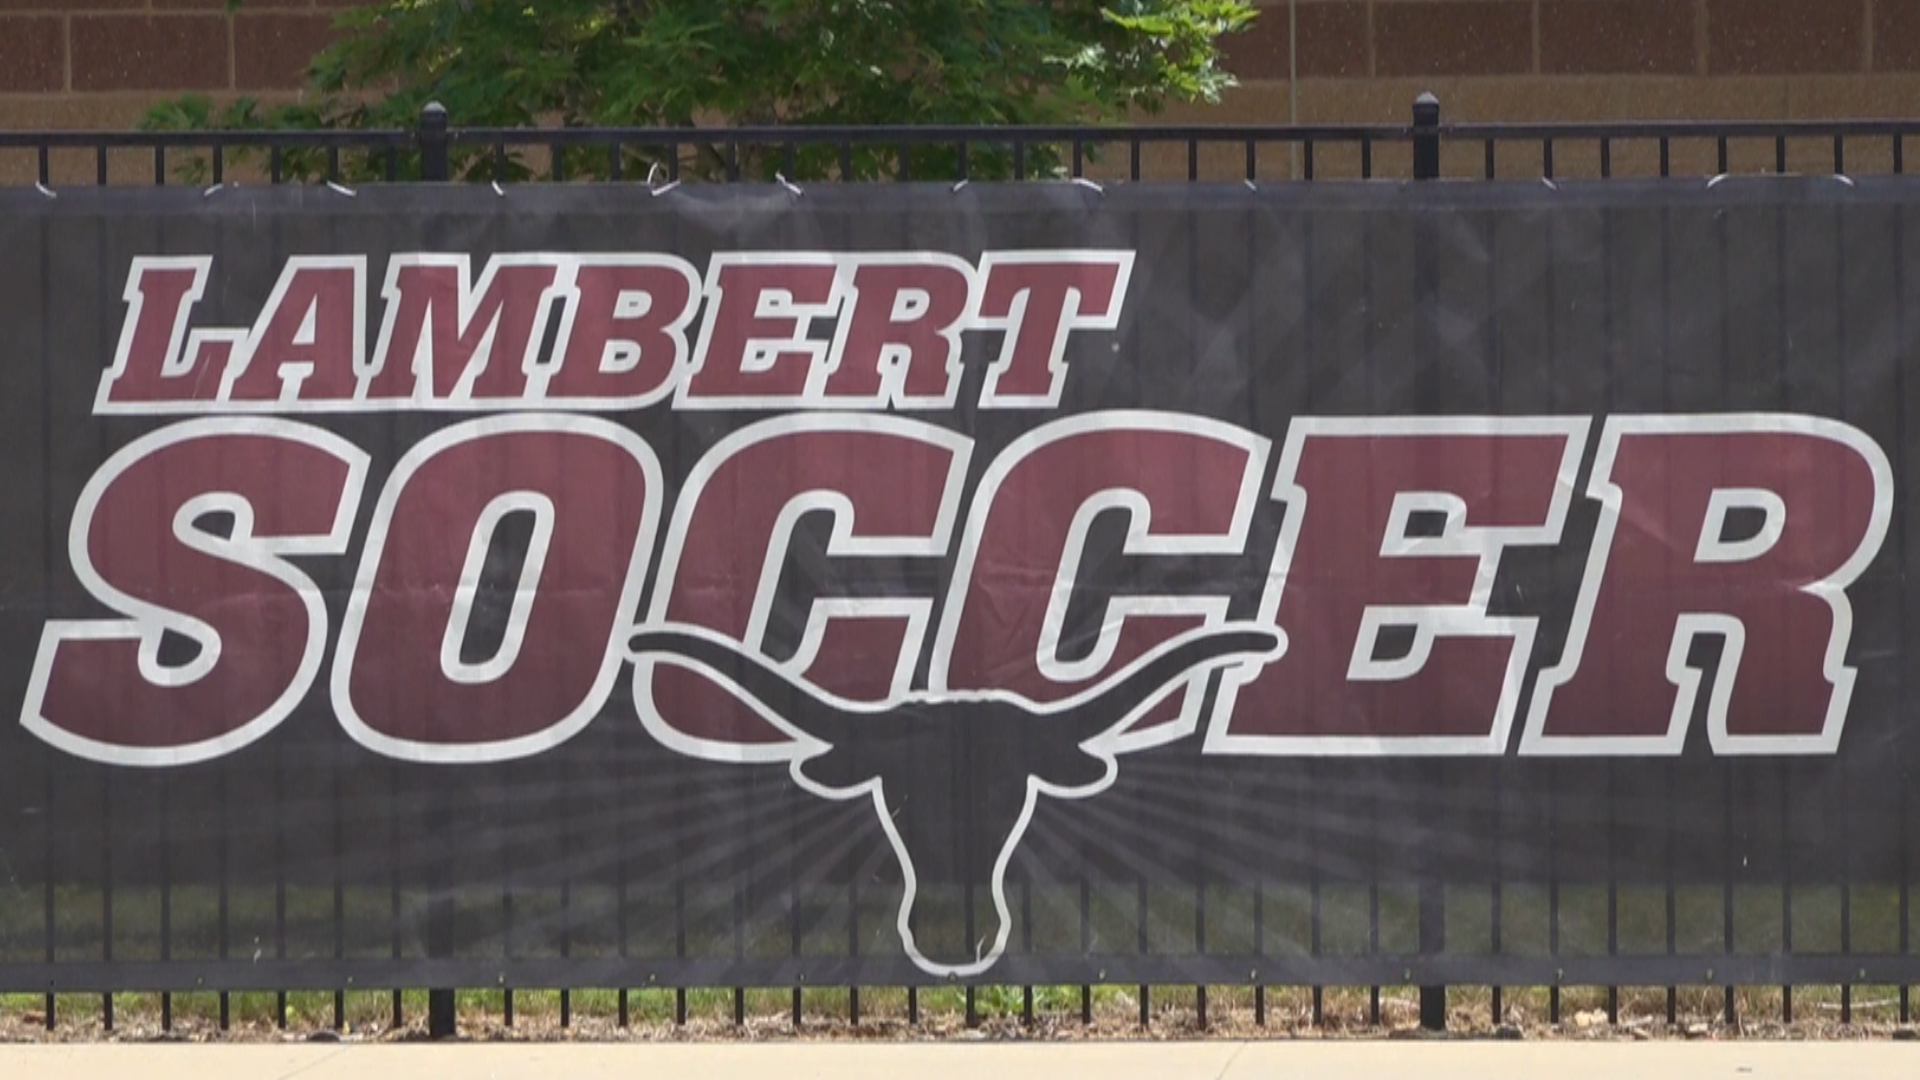 The boys and girls soccer teams at Lambert High School will both compete for state titles this weekend.